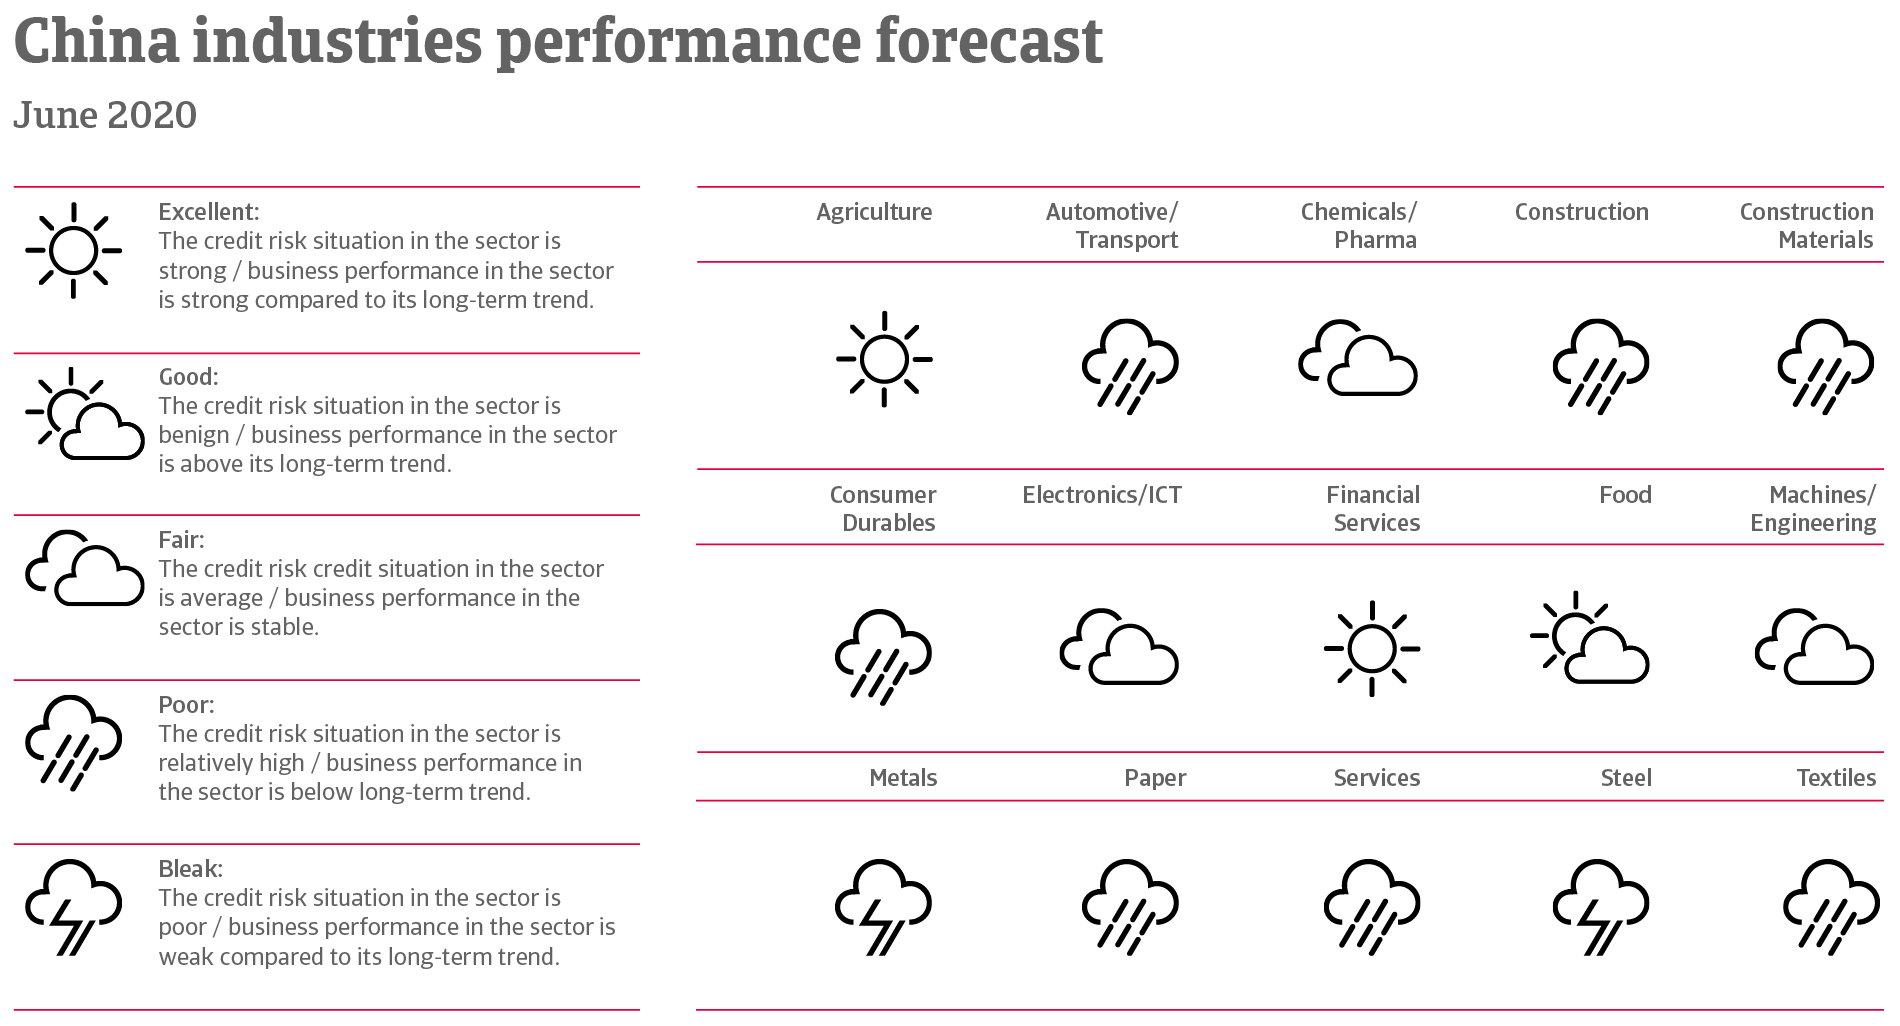 Performance forecast of Chinese industries